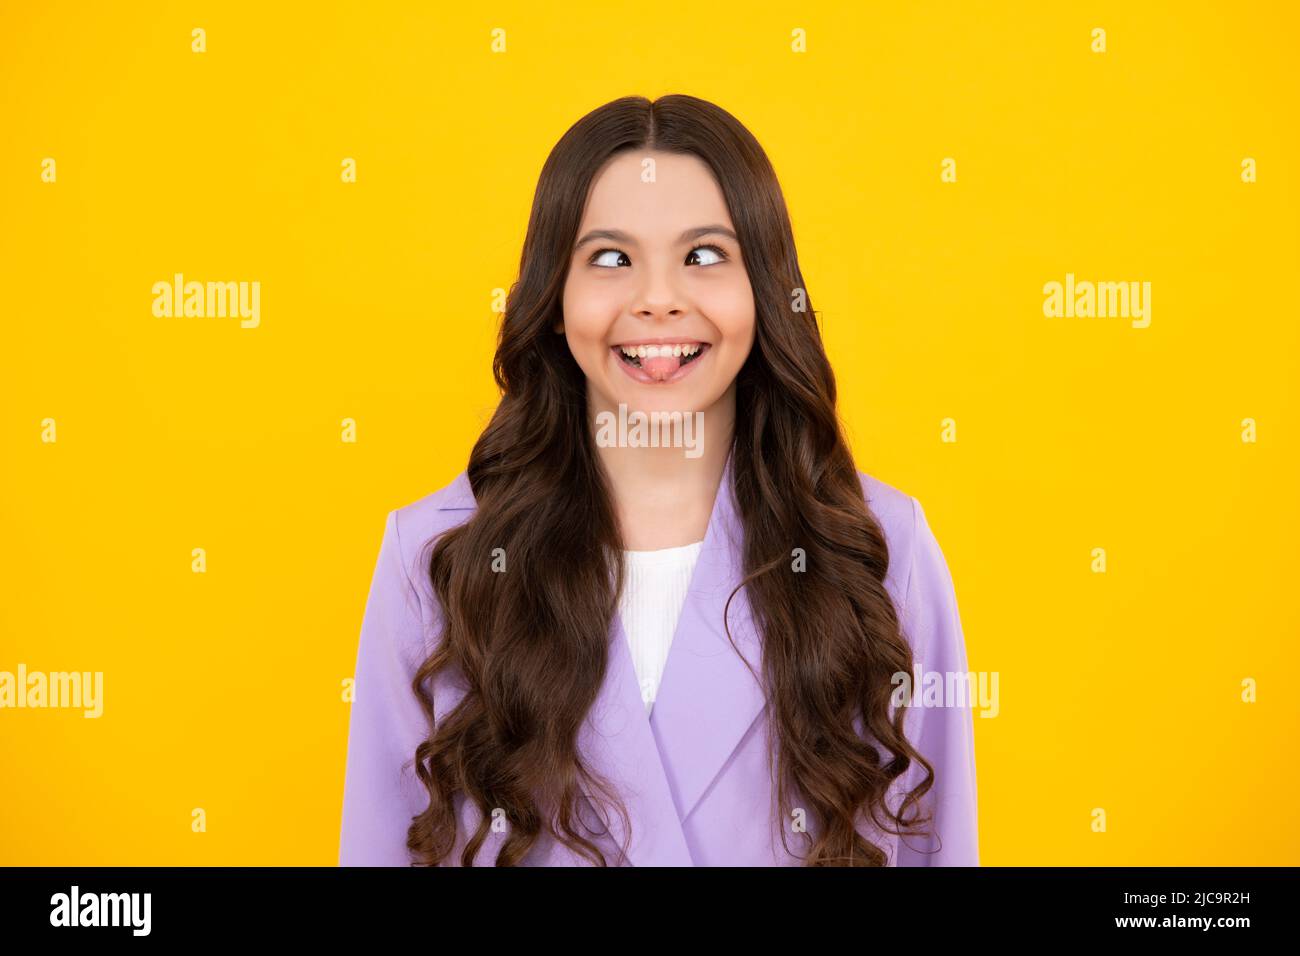 Funny face. Portrait of silly teenager child girl smiling and showing tongue. Stock Photo